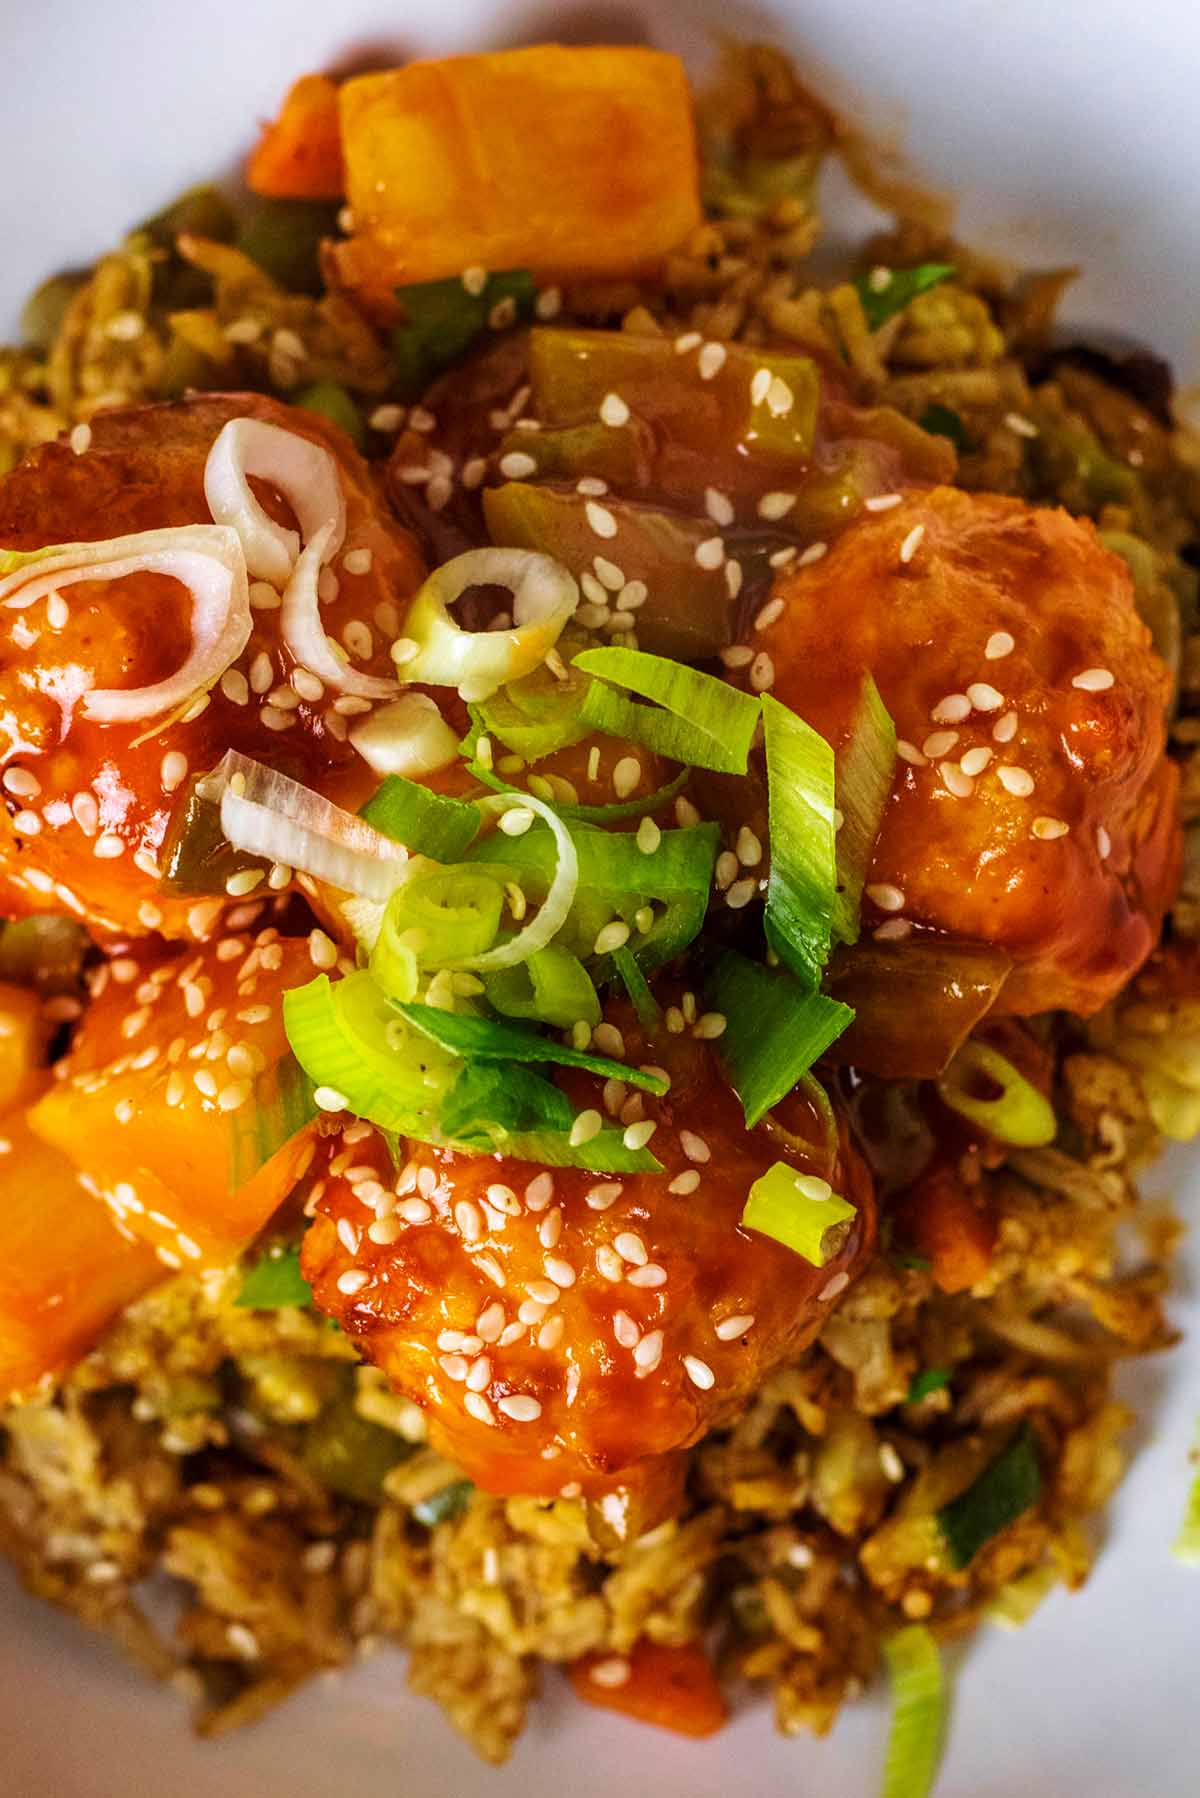 Meatballs on a bed of rice topped with sesame seeds and chopped spring onions.